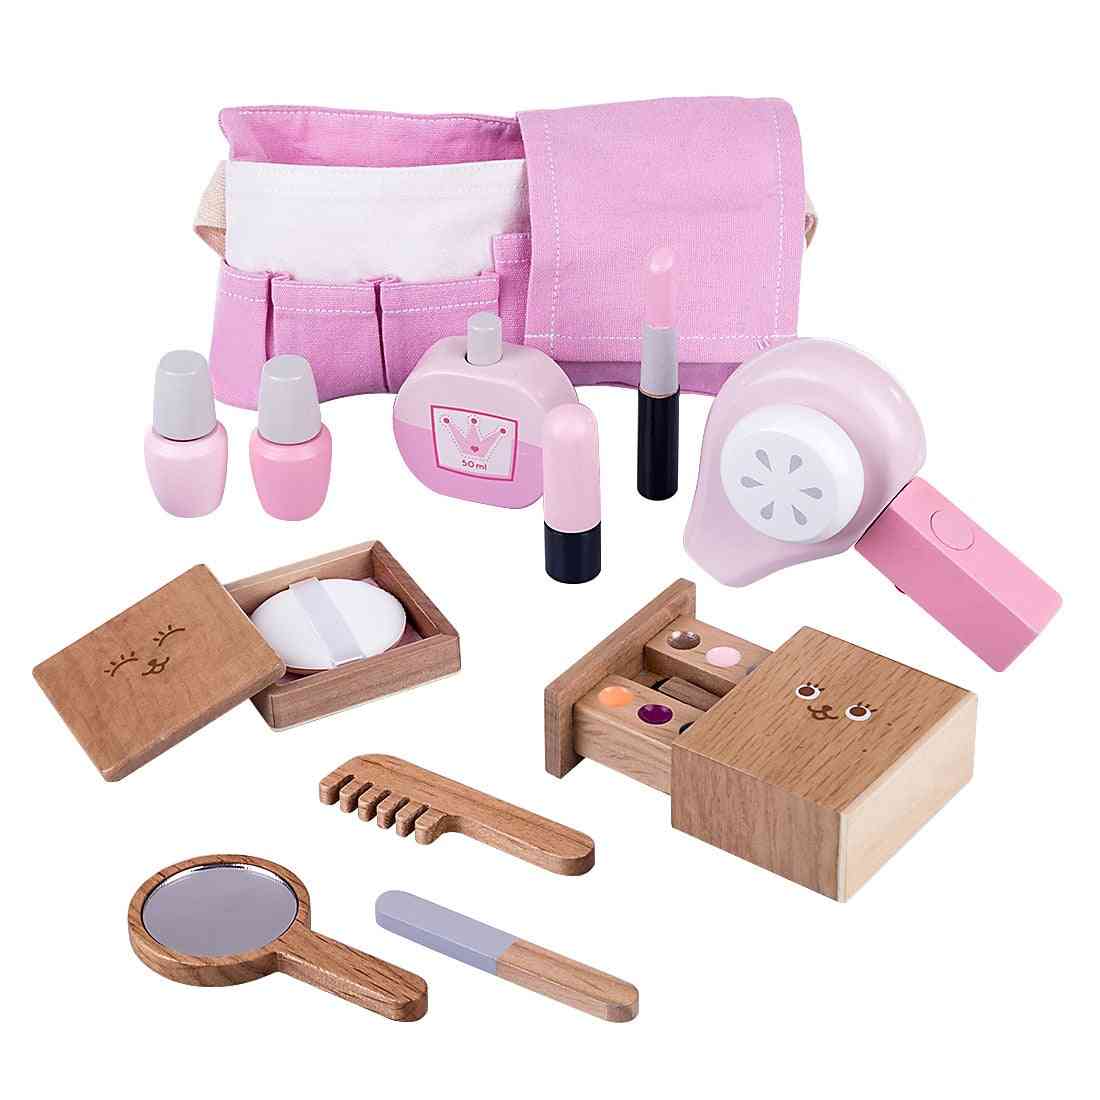 12pcs Of Wooden Makeup Pretend Play Set-simulation For